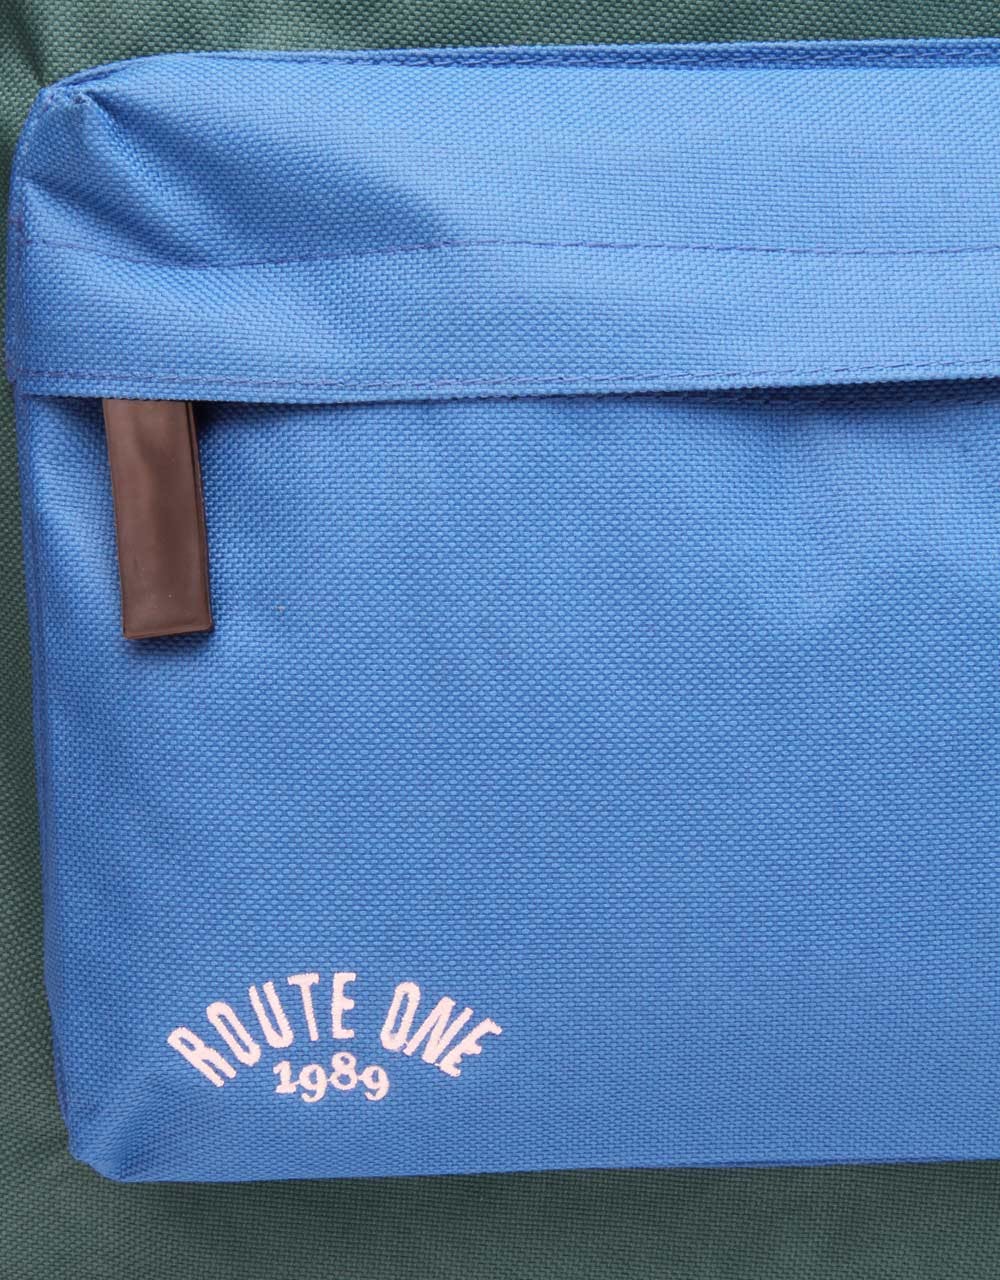 Route One Backpack - Forest Green/Cyan